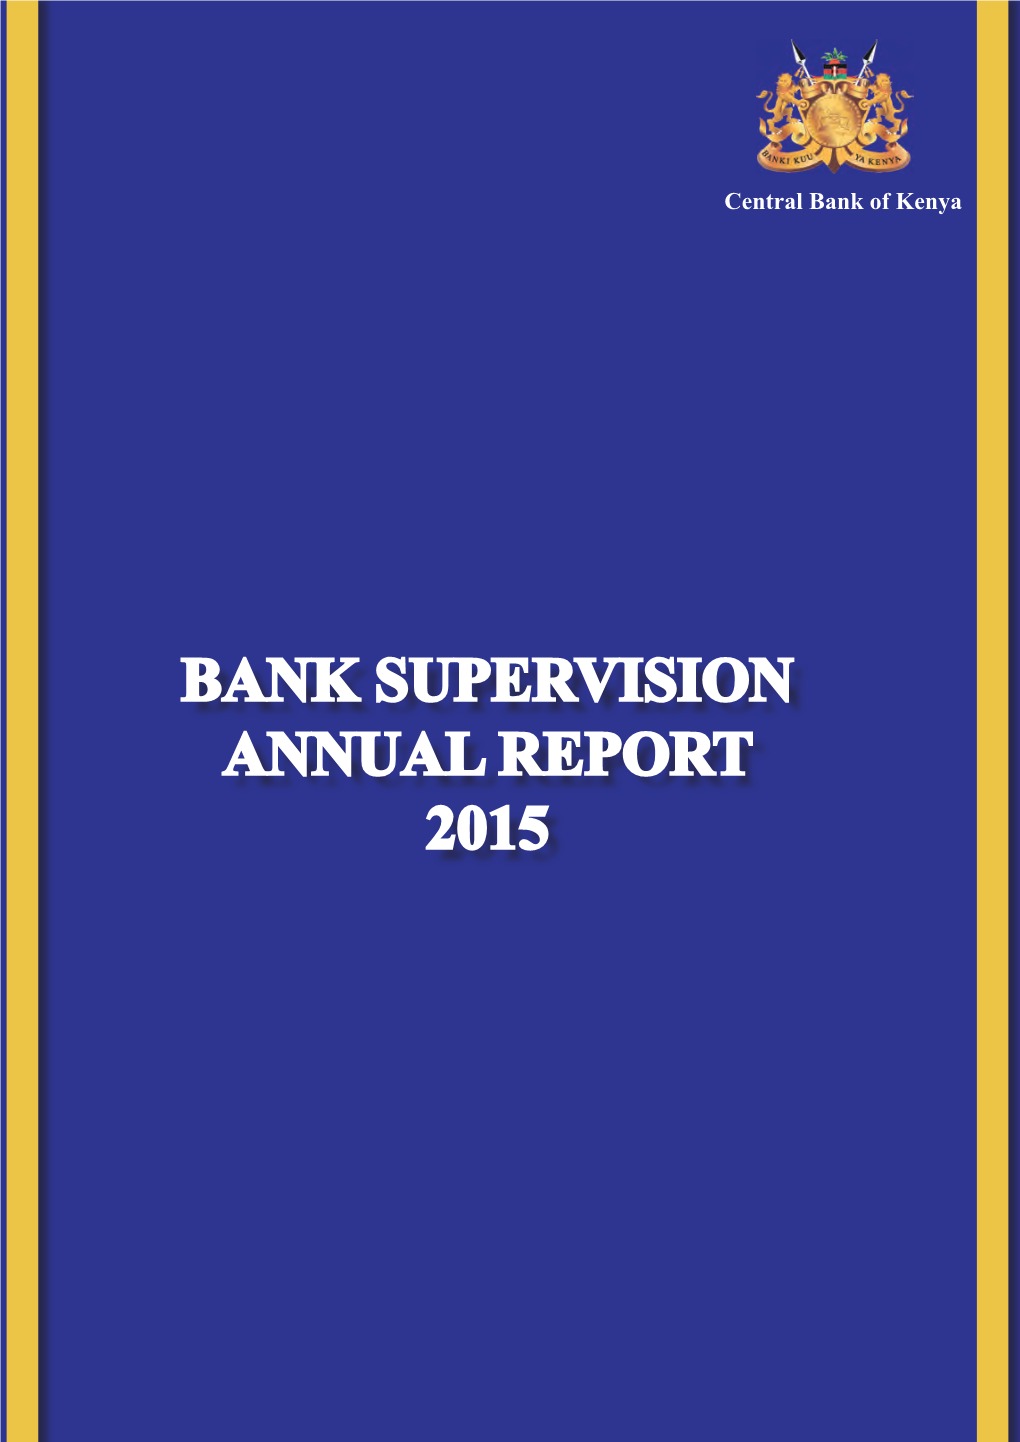 BANK SUPERVISION ANNUAL REPORT 2015 Central Bank of Kenya